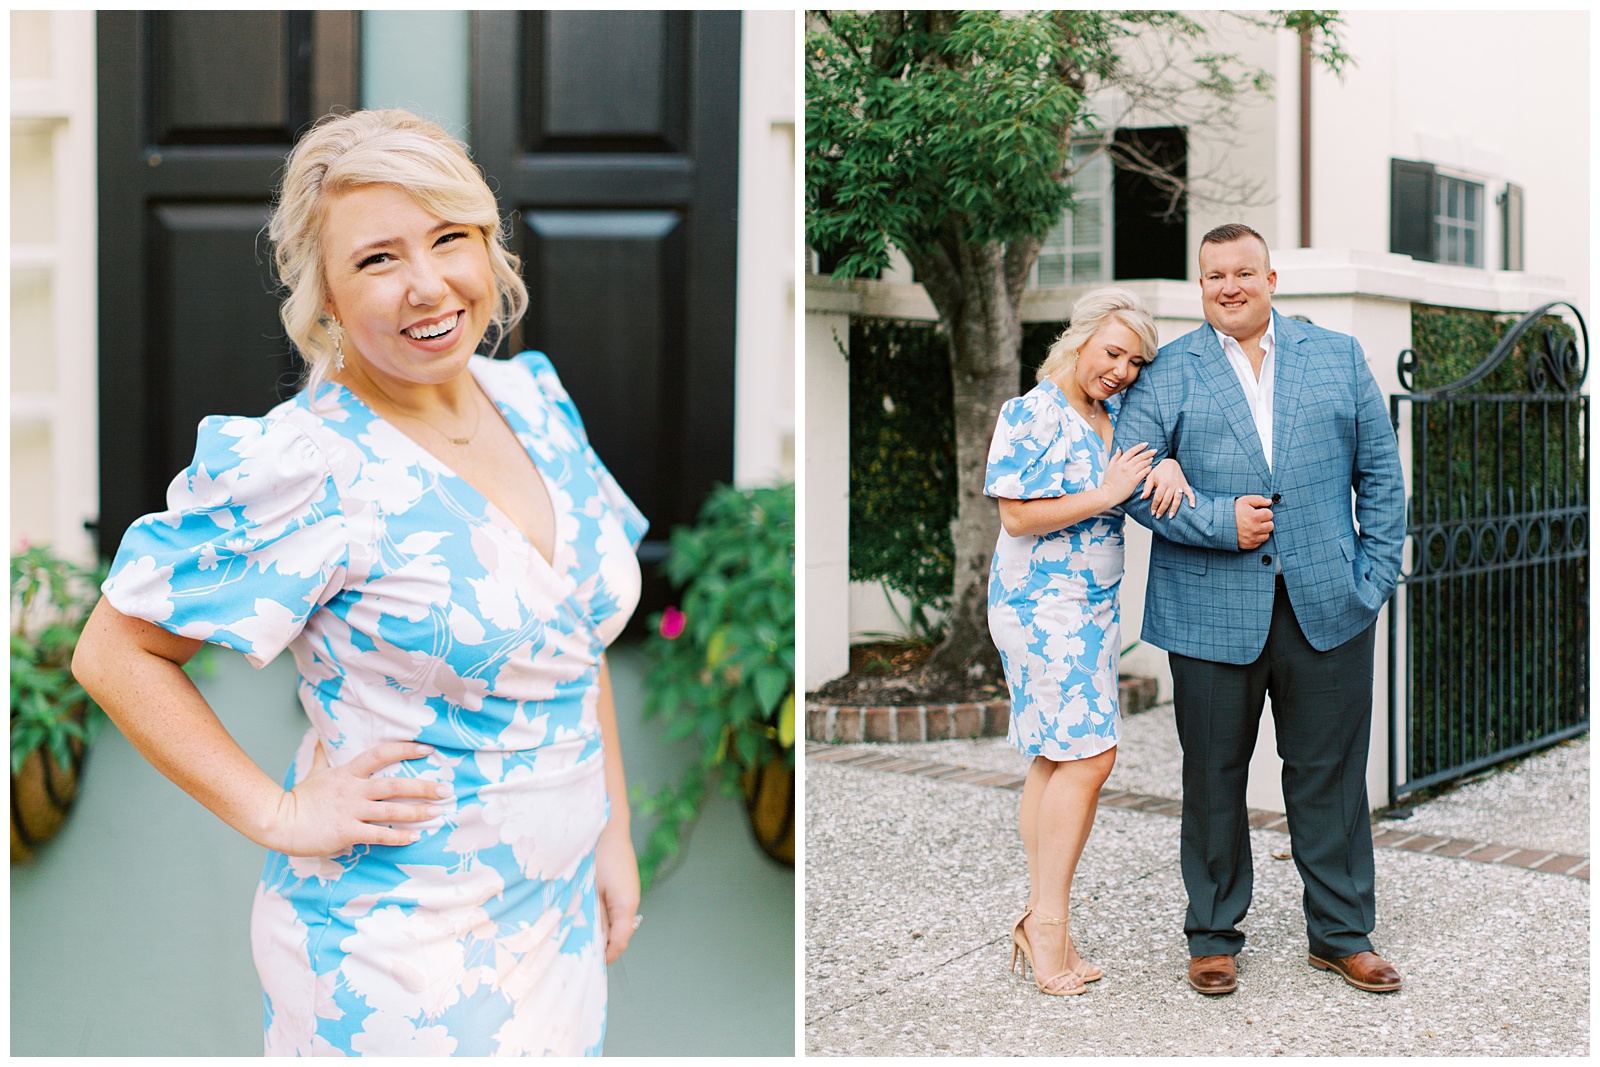 Downtown Charleston engagement session for couple in blue and white outfits